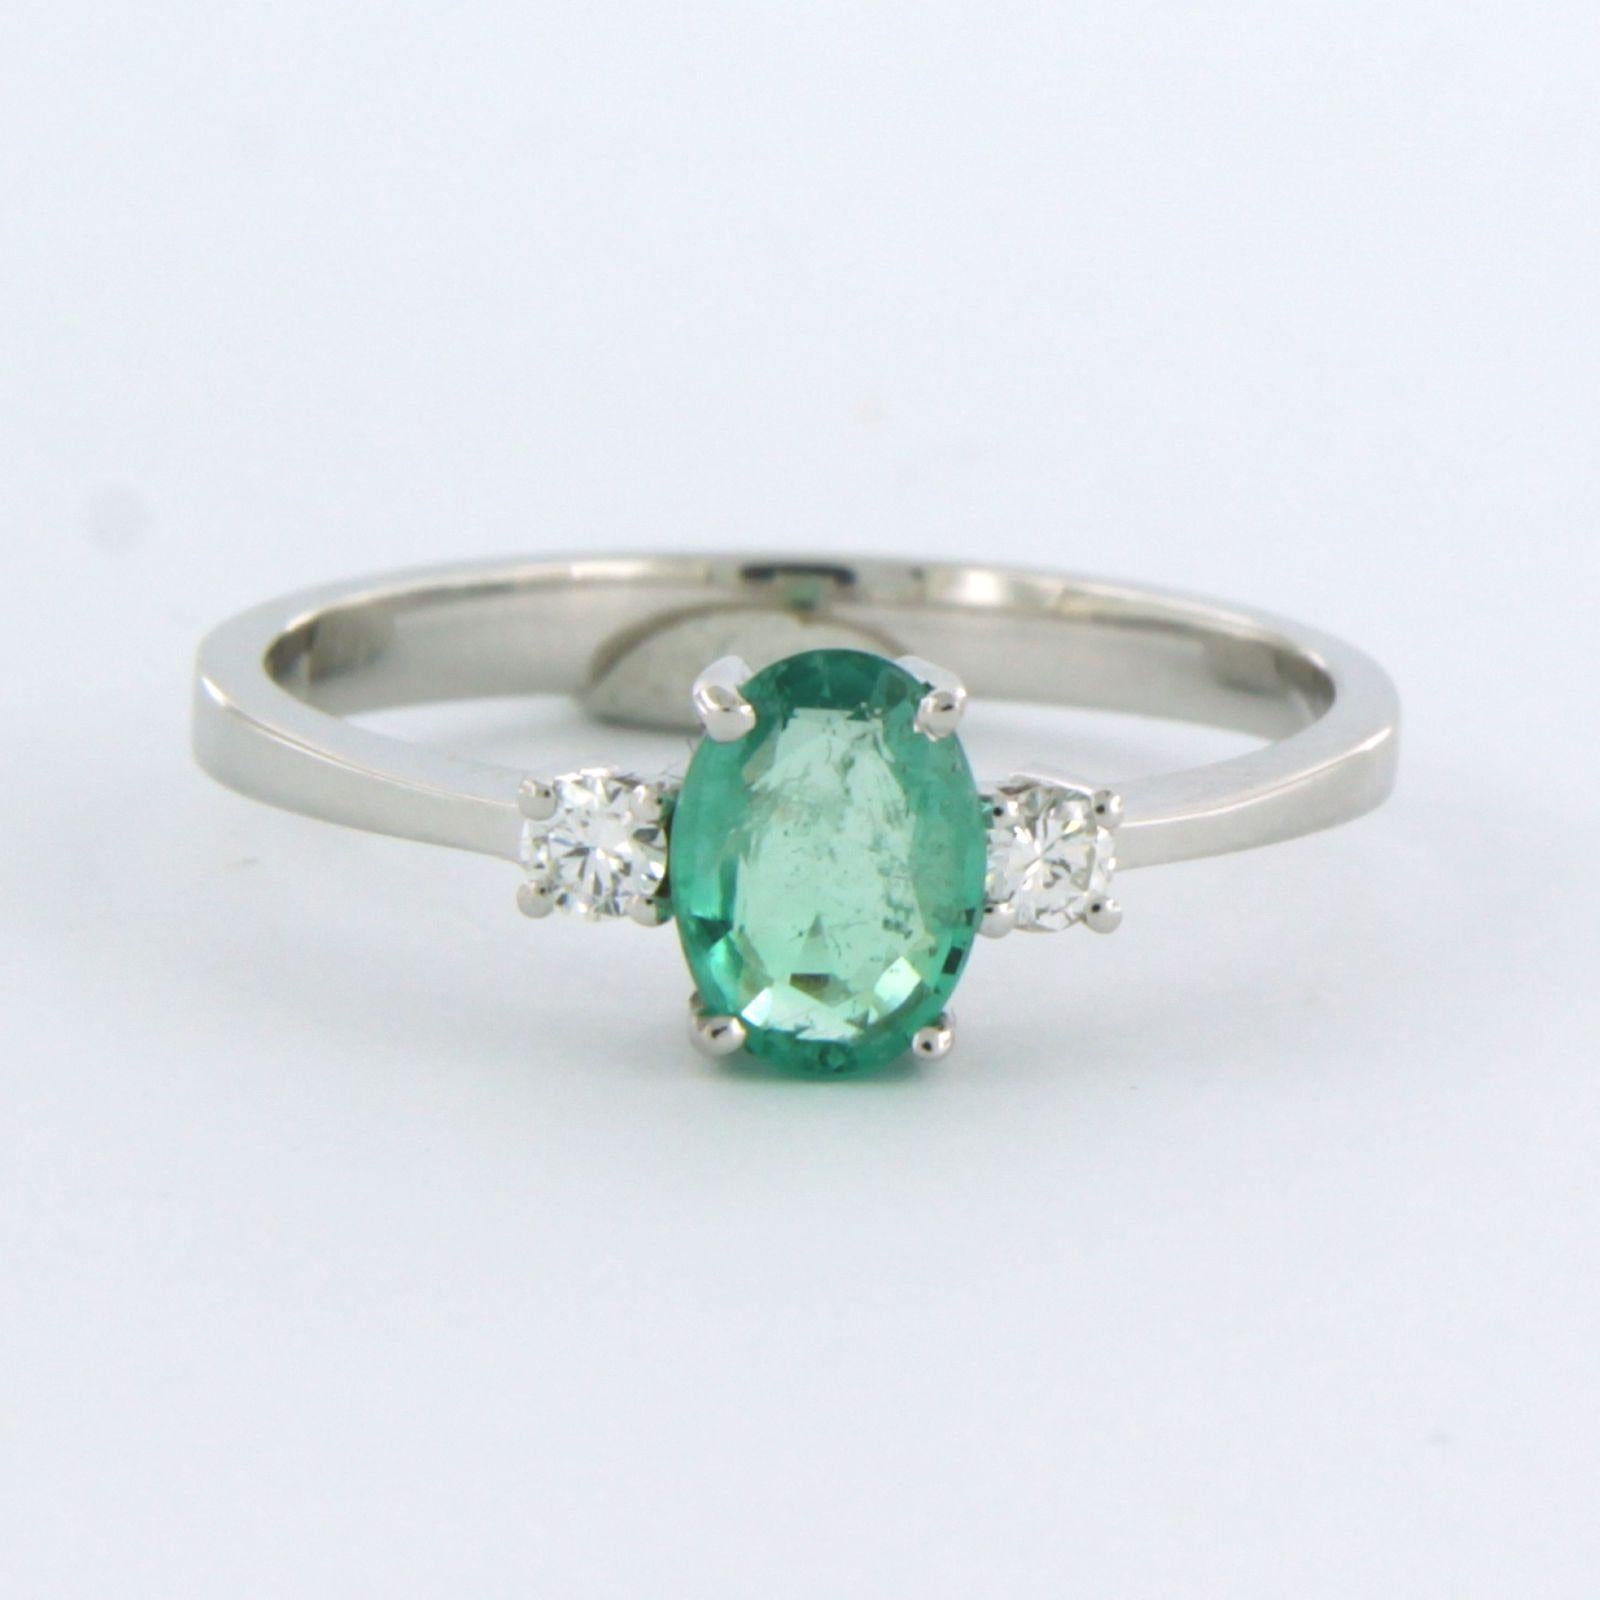 18k white gold ring set with emerald 0.70 ct and brilliant cut diamond up to. 0.10ct - F/G - VS/SI - ring size U.S. 7.25 - EU. 17.5(55)

detailed description:

the top of the ring is 7.5 mm wide

weight 2.4 grams

ring size US 7.25 - EU. 17.5(55),